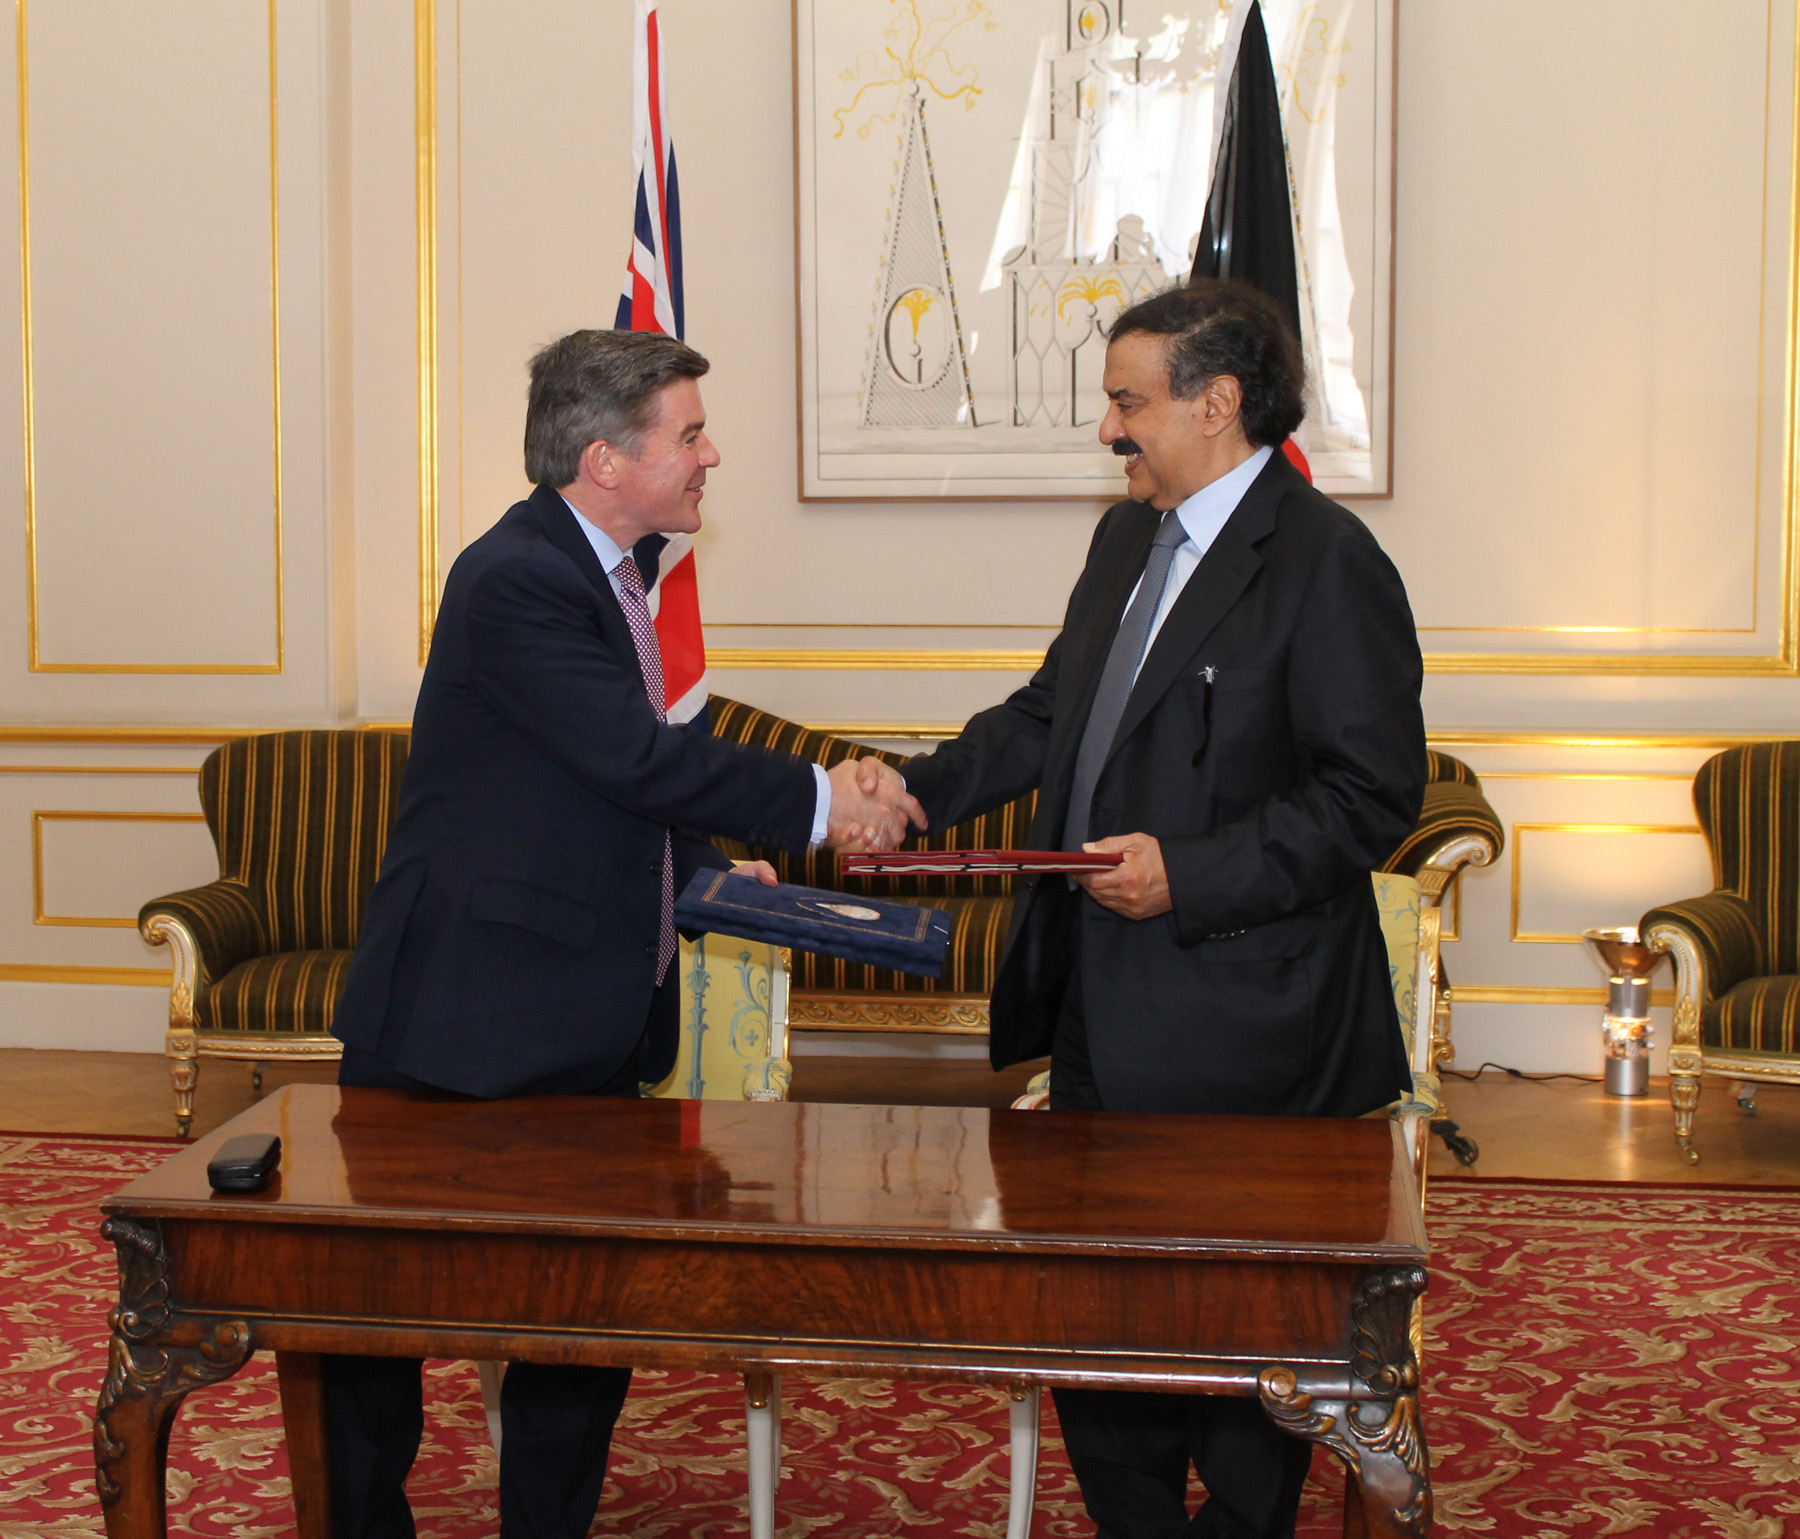 Kuwait Foreign Ministry Undersecretary Khaled Al-Jarallah and British Secretary of State for the Middle East and North Africa Hugh Robertson